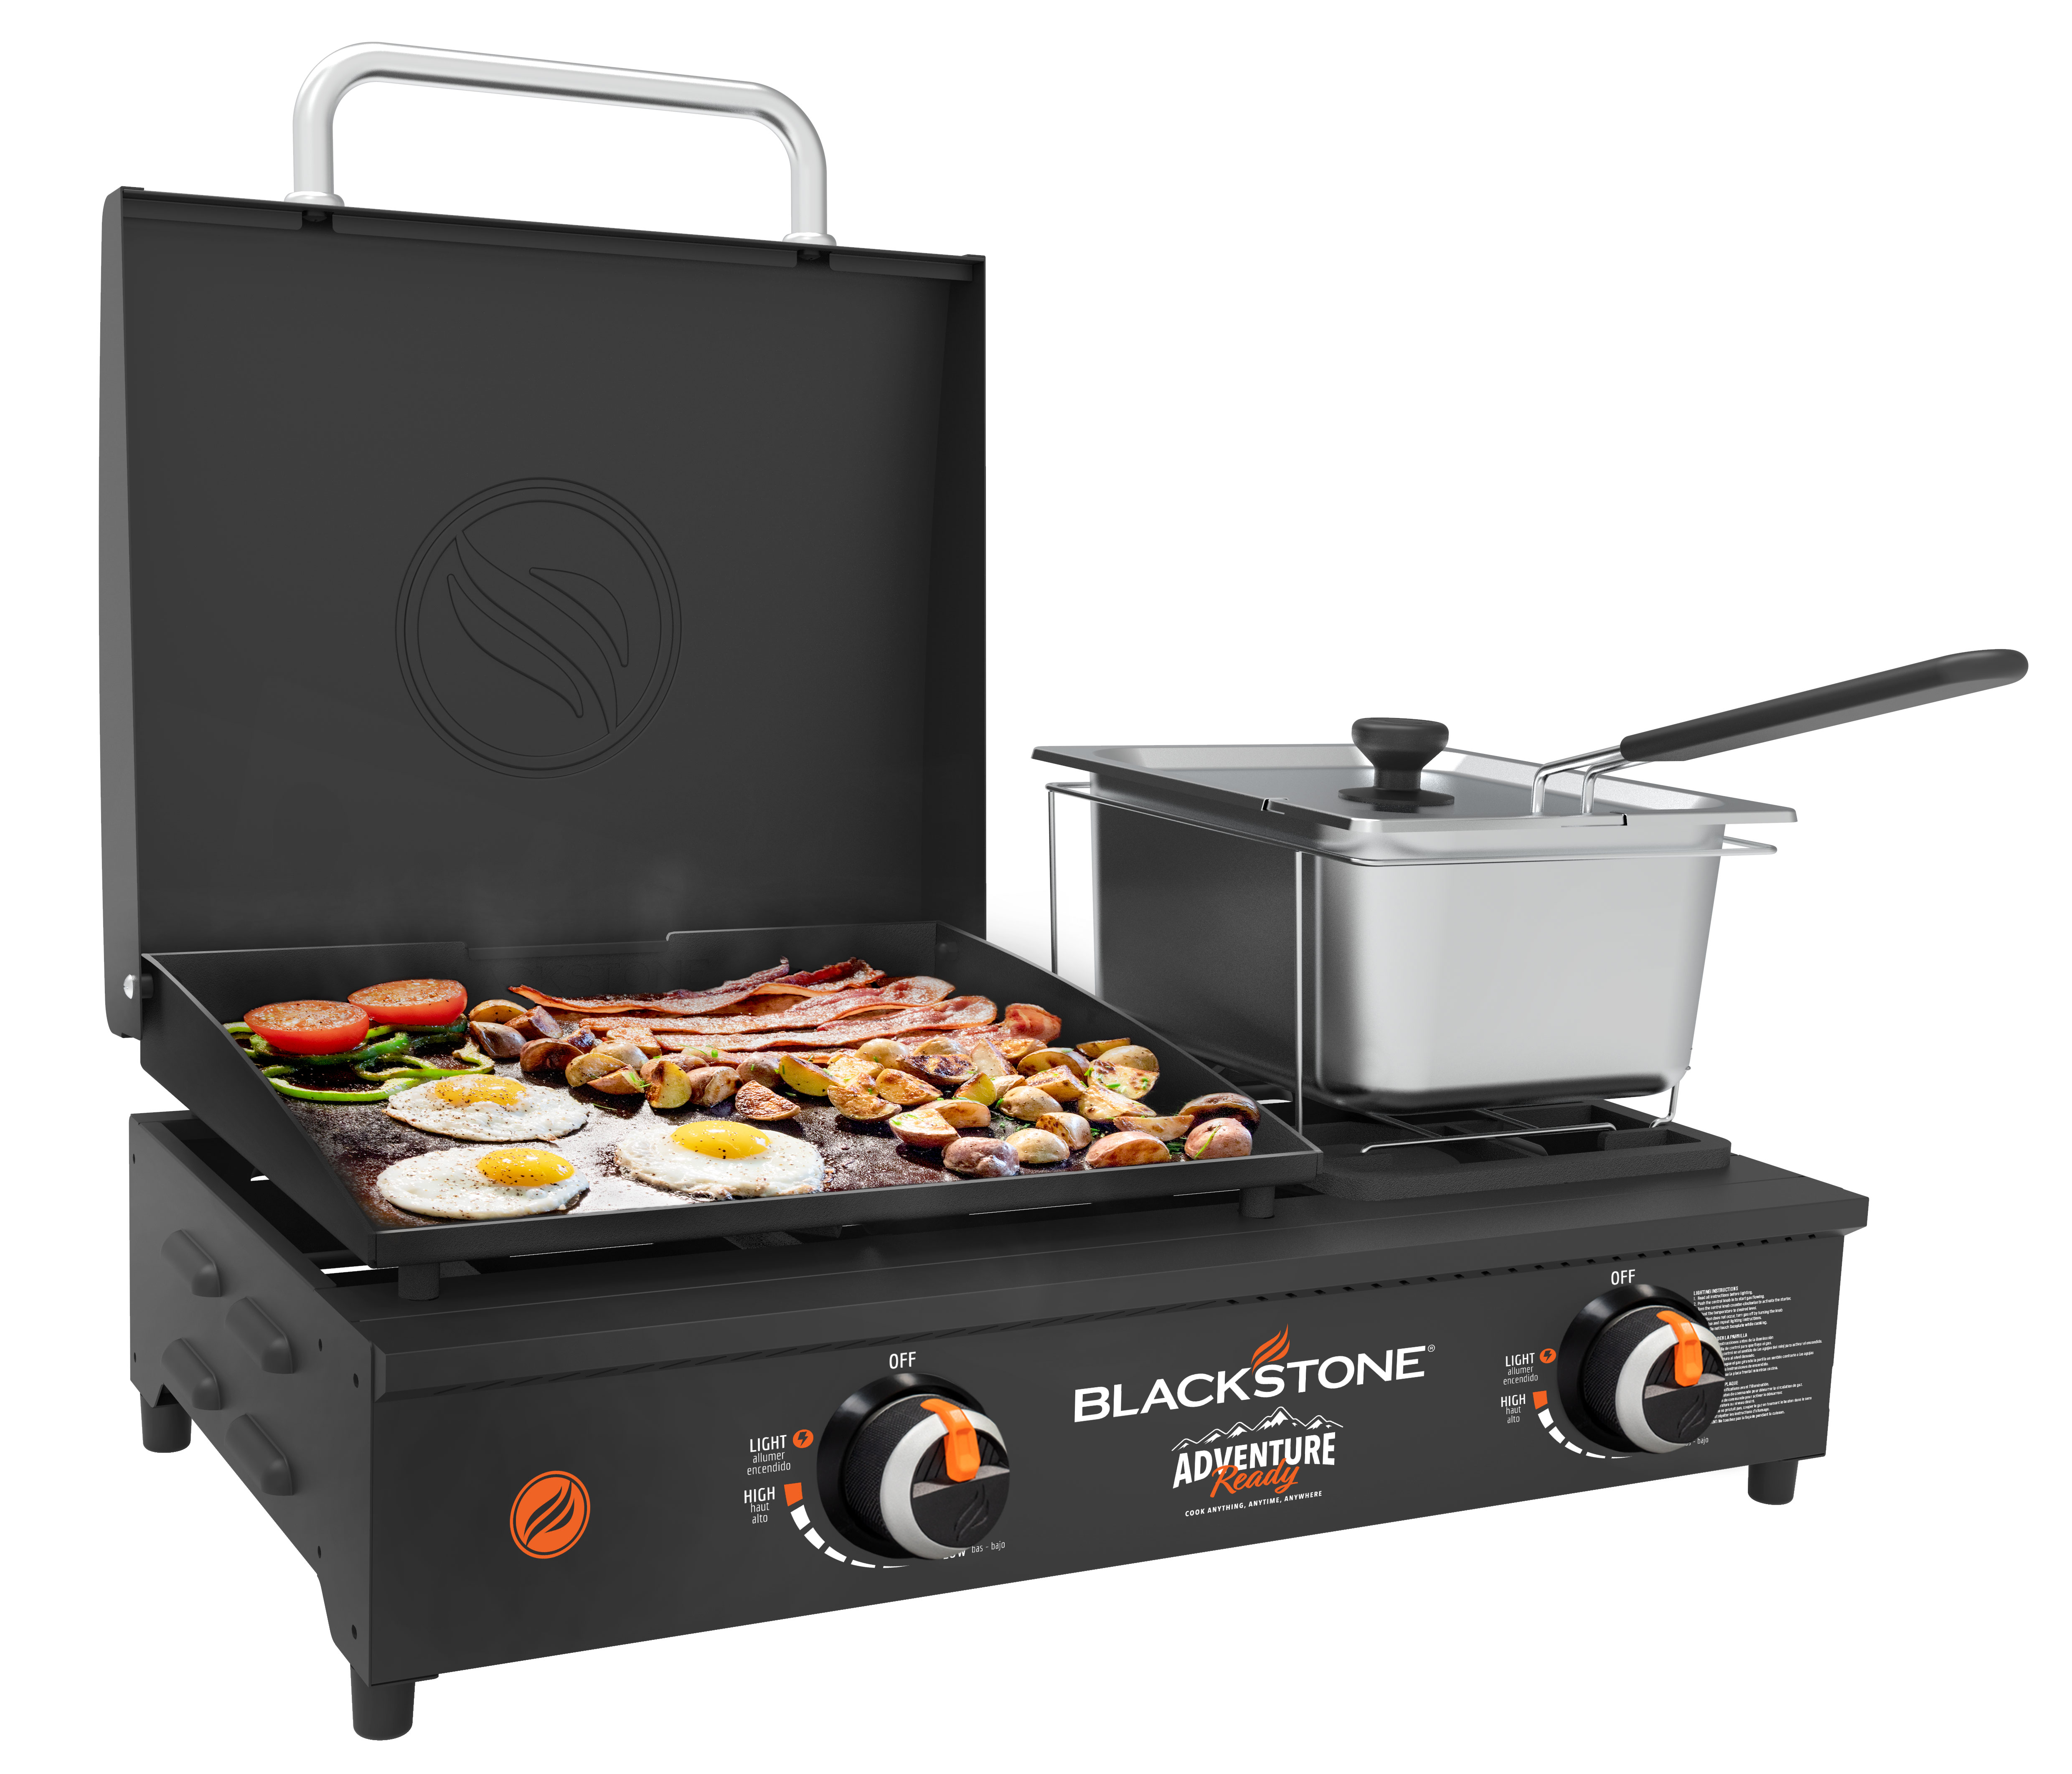 Blackstone Adventure Ready 17" Tabletop Griddle Combo with Fryer - image 1 of 18